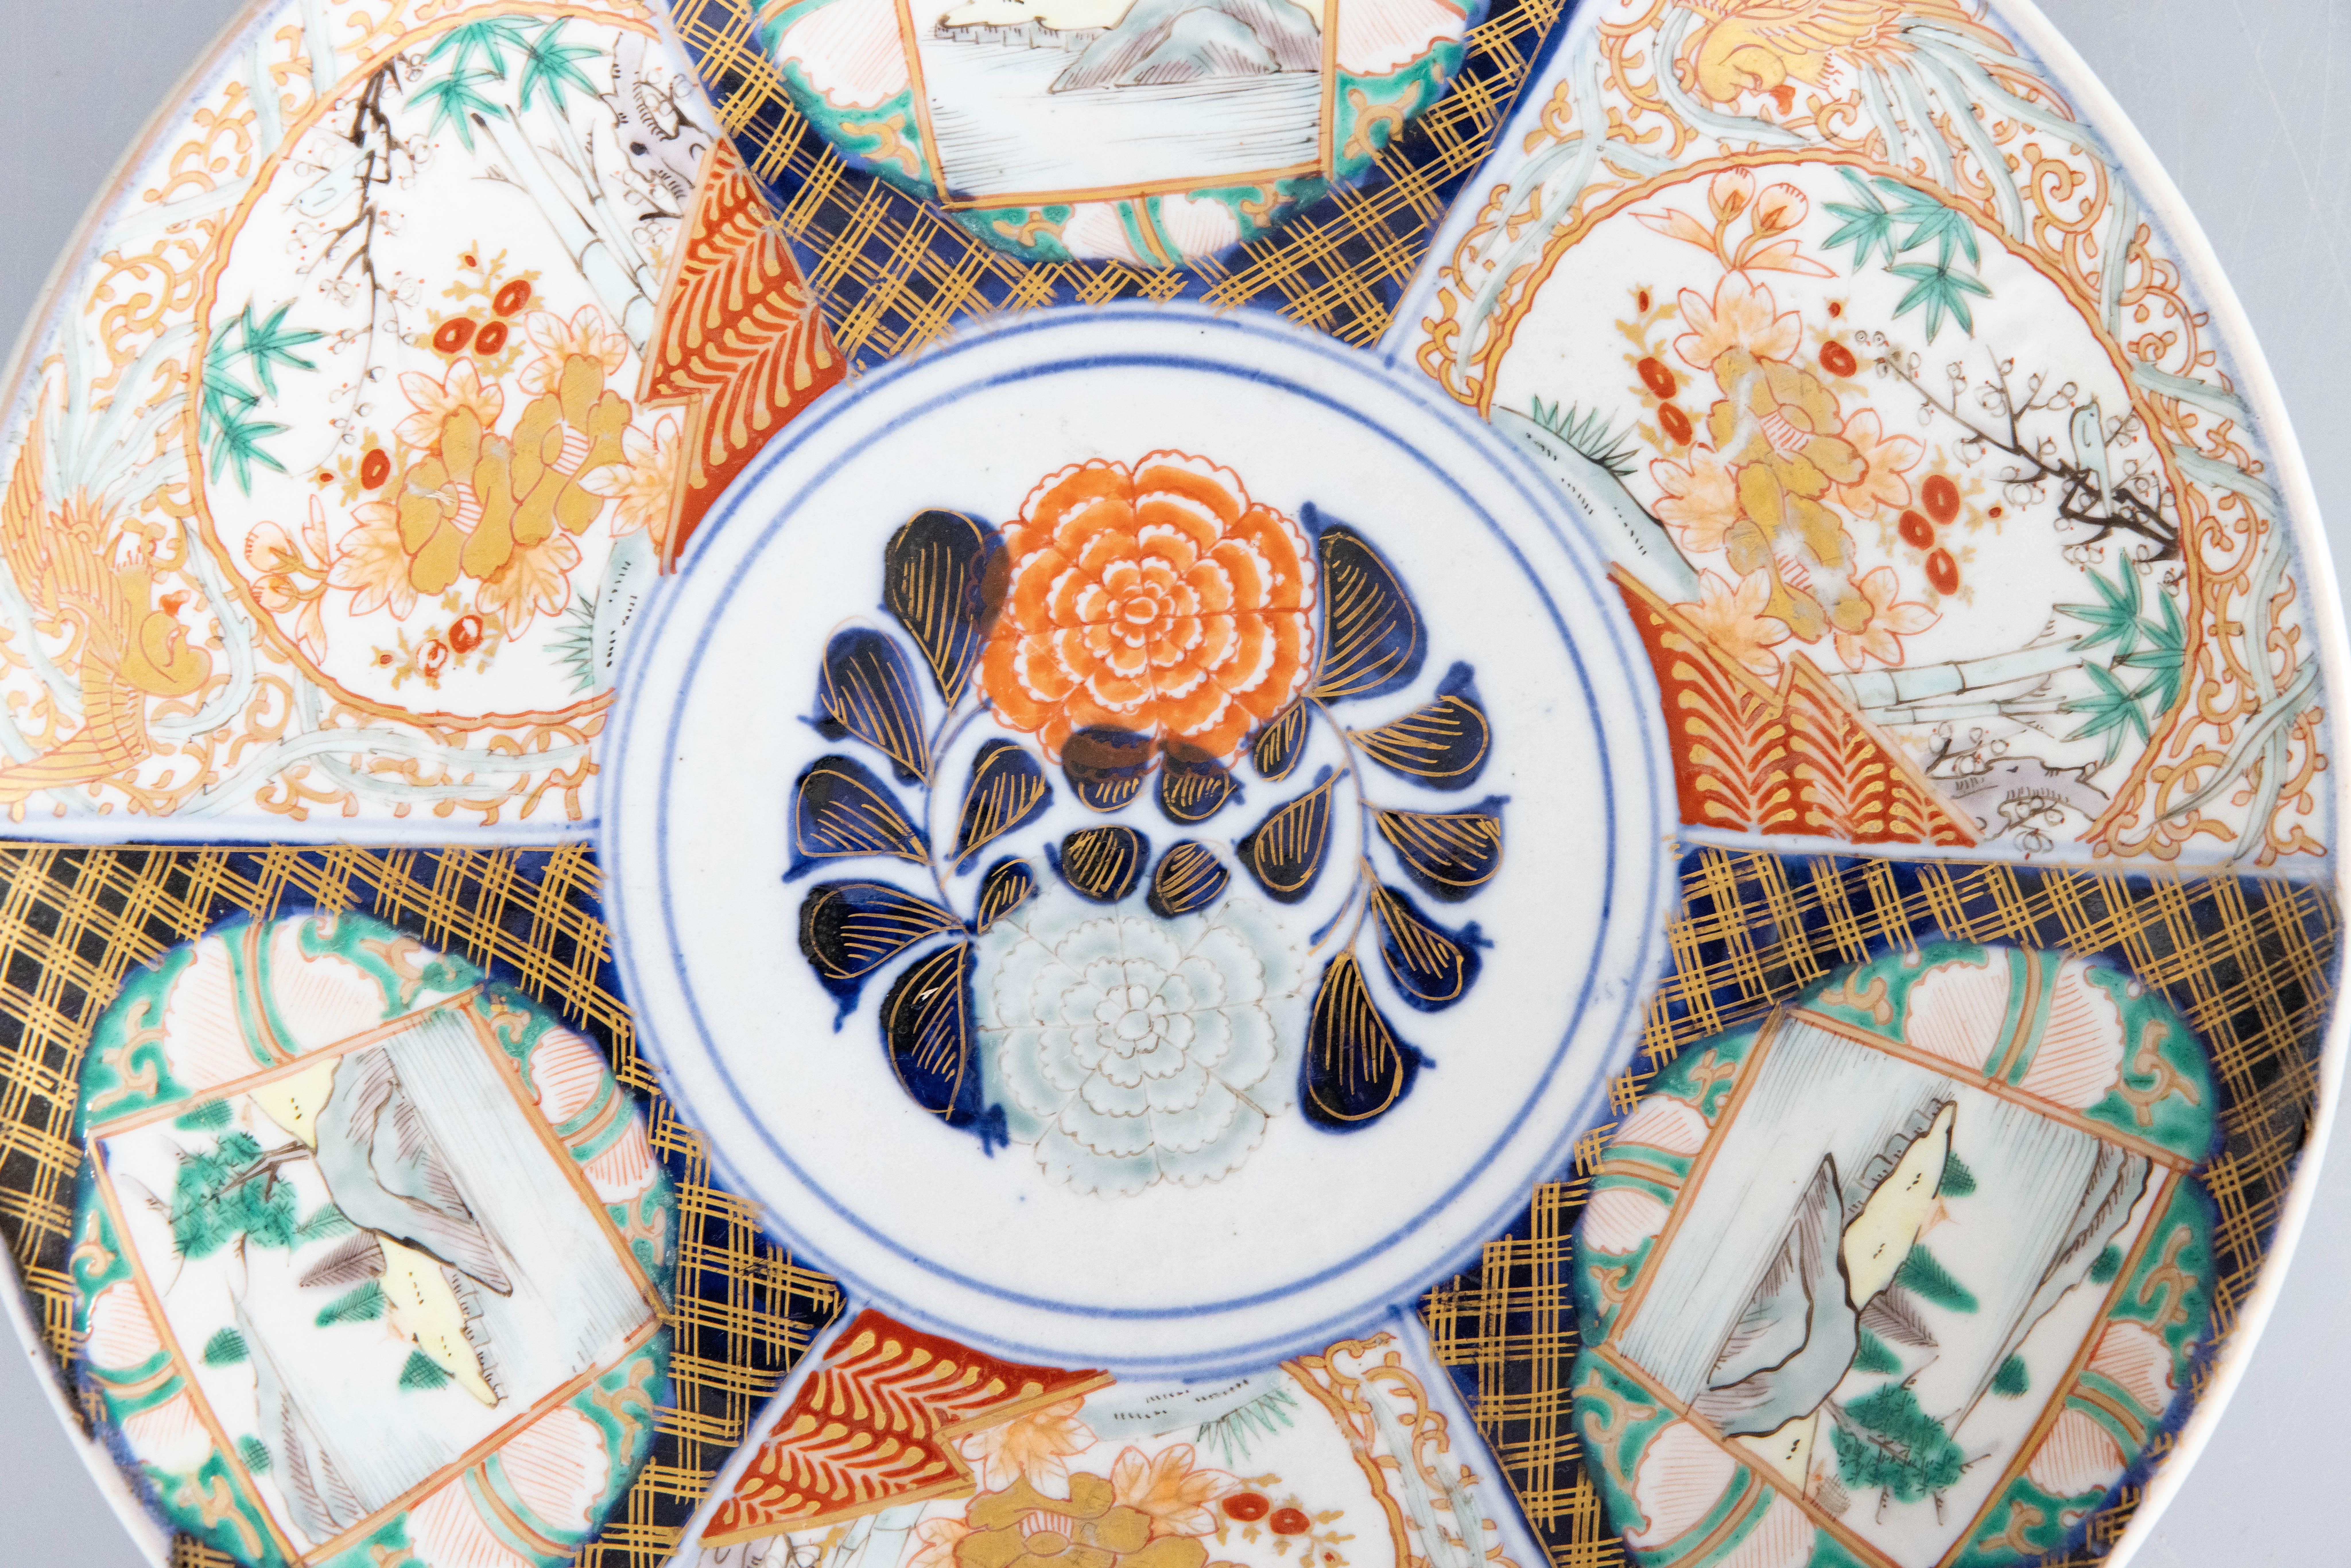 A gorgeous 19th-Century Japanese Meiji Period Imari porcelain charger with a hand painted floral design in the traditional Imari colors with stunning gilt accents. This fine large plate has lovely hand painted details and is quite heavy, weighing